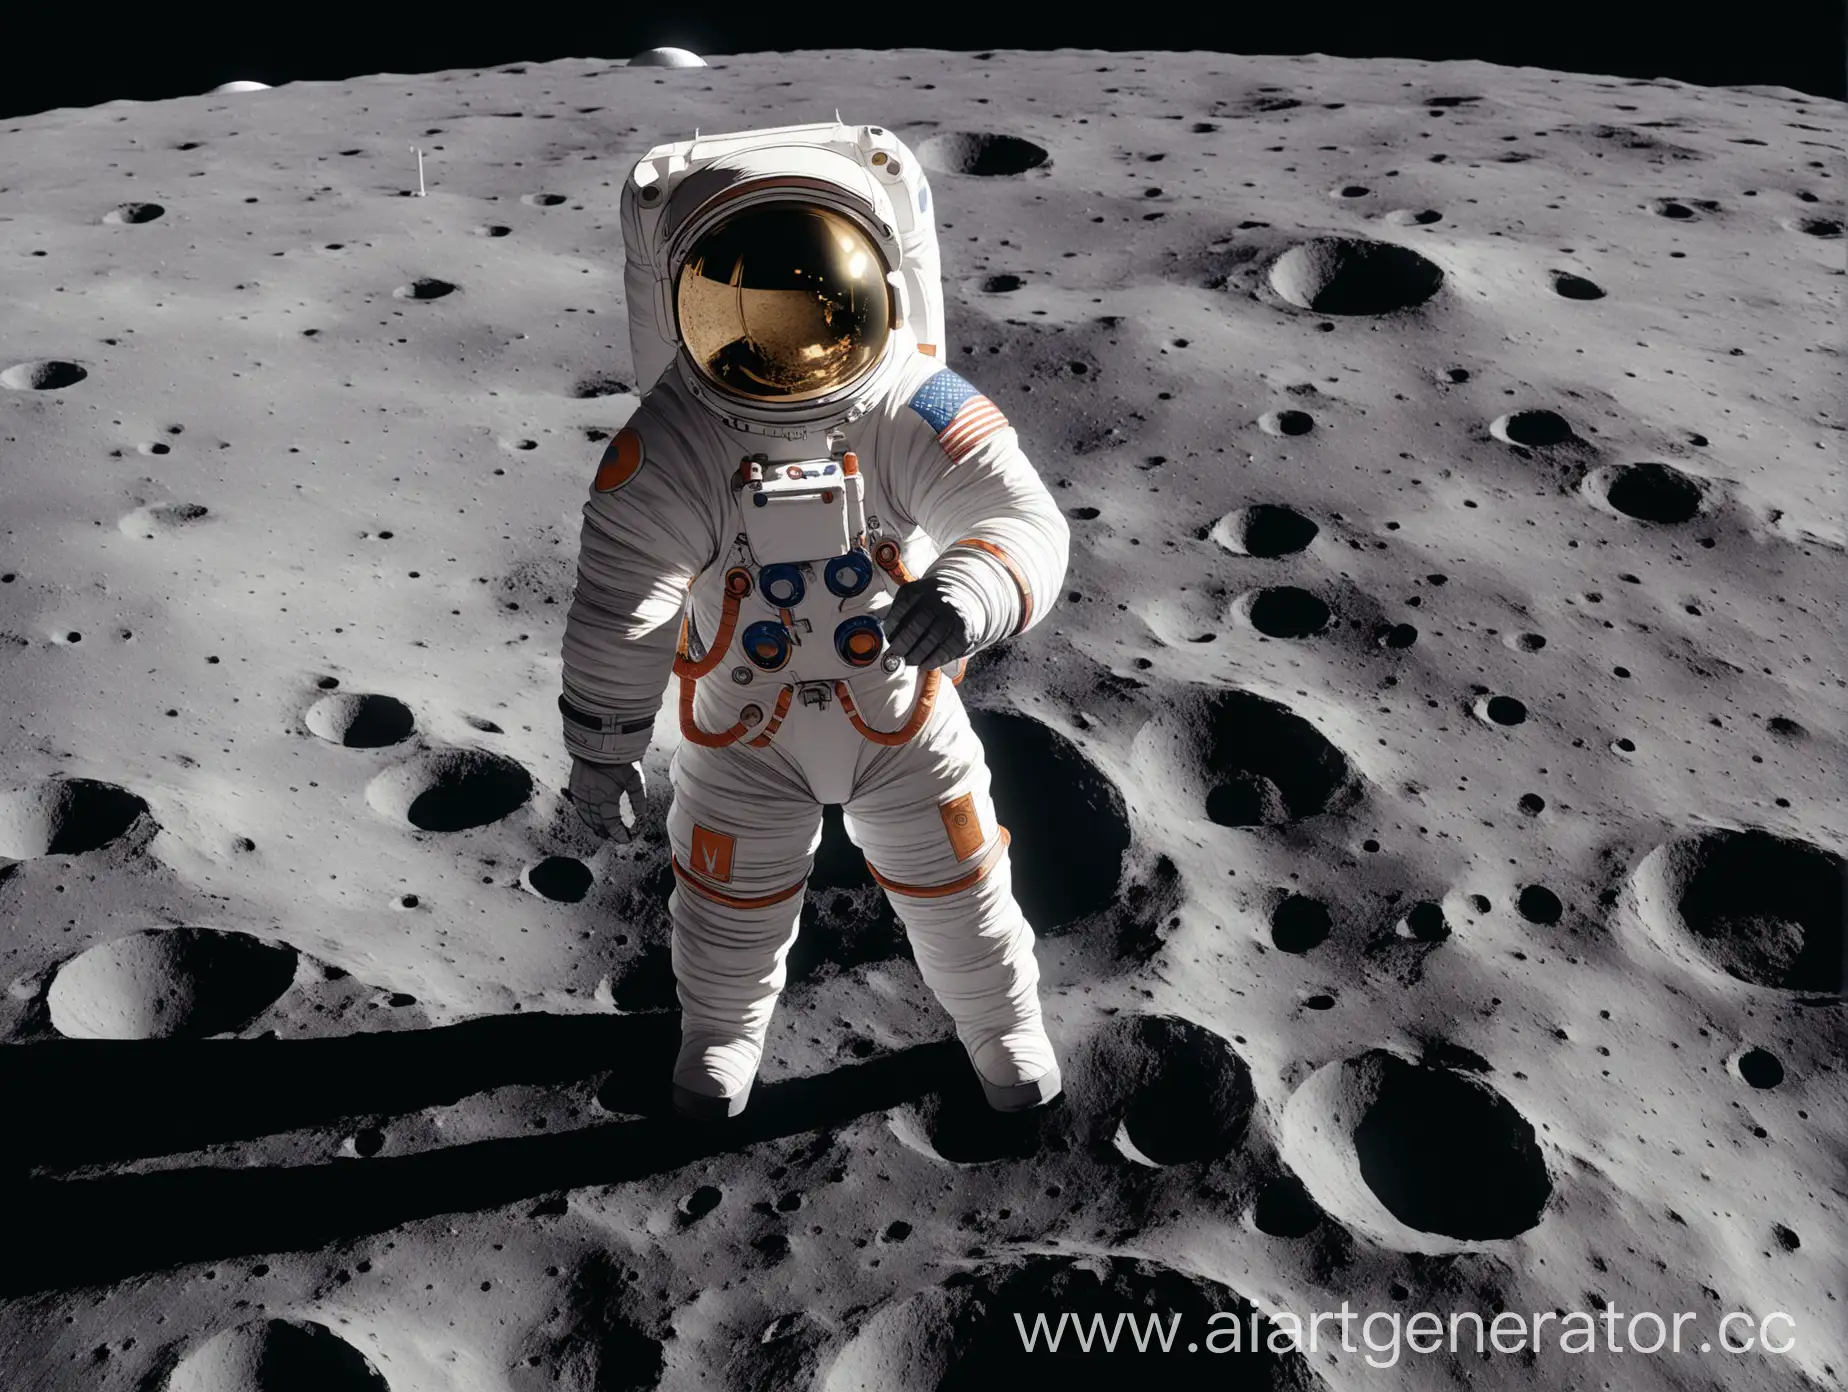 Astronaut-on-Lunar-Surface-Wearing-Spacesuit